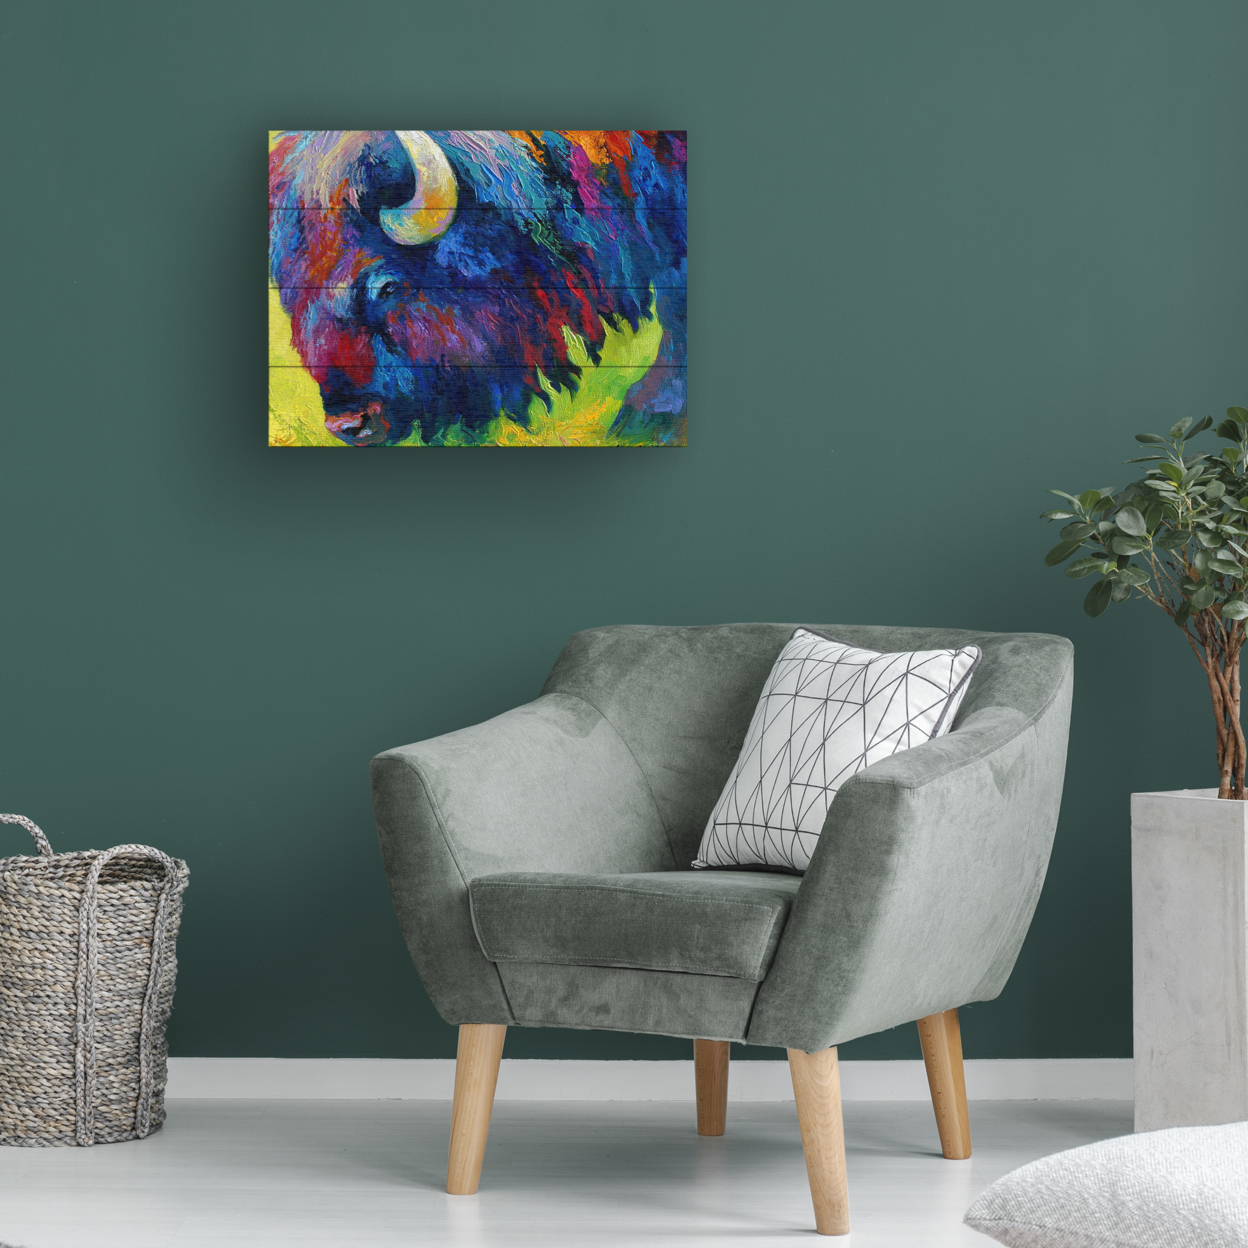 Wall Art 12 X 16 Inches Titled Bison Portrait II Ready To Hang Printed On Wooden Planks